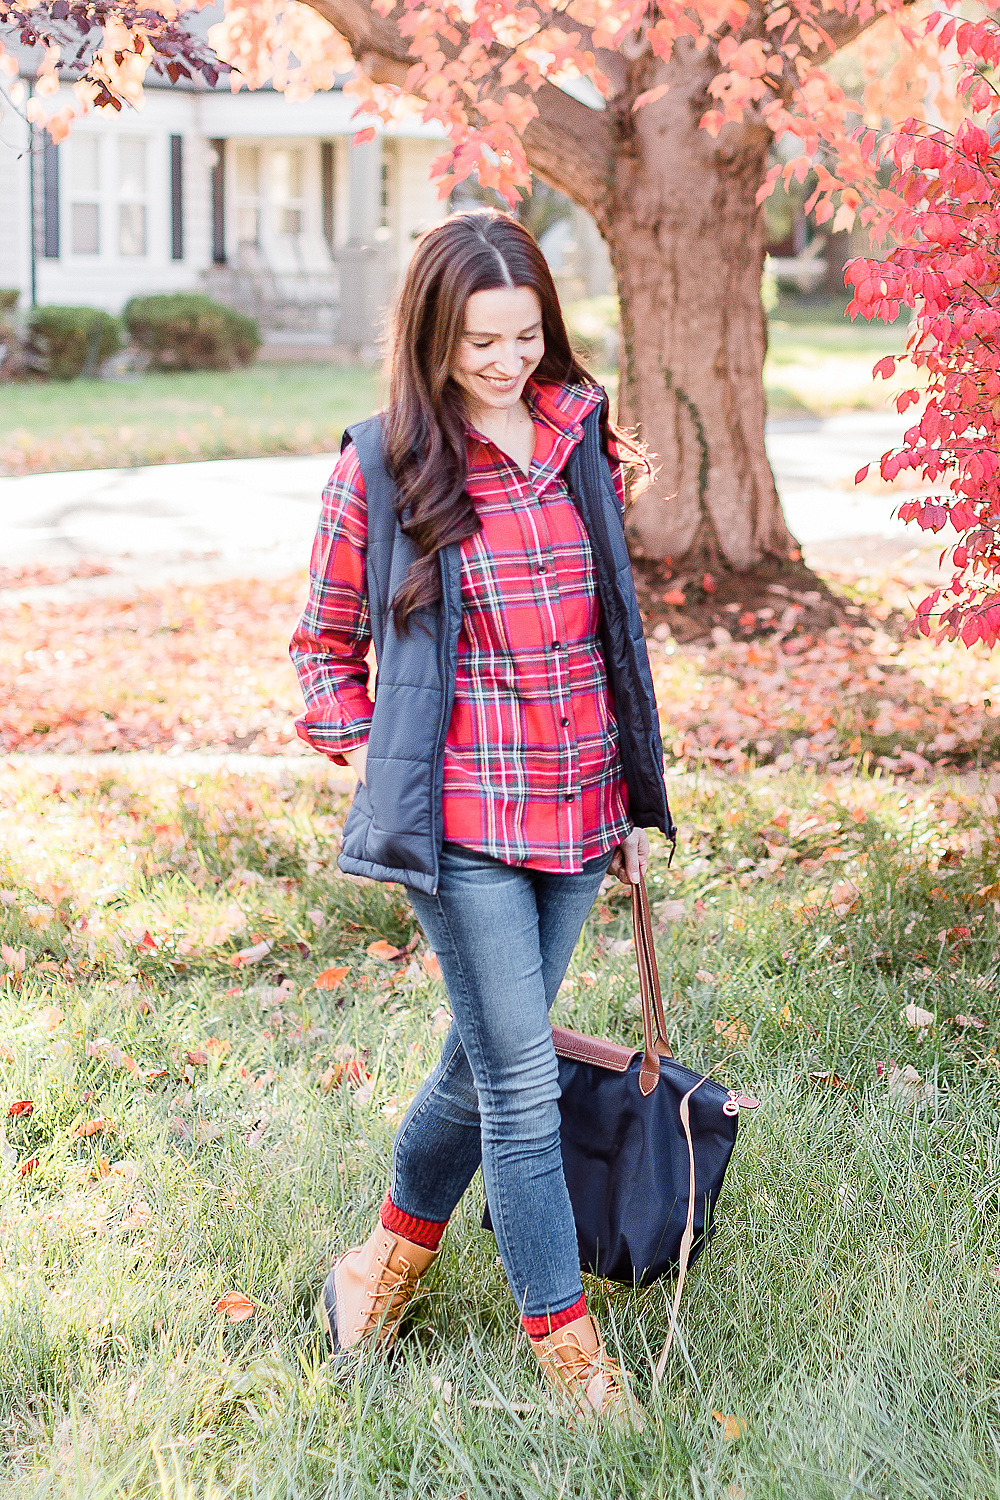 10 Best LL Bean Products for Winter by popular affordable fashion blogger Stephanie Ziajka on Diary of a Debutante, LL Bean Royal Stewart Tartan Relaxed Flannel styled with Classic Bean Boots, Navy Amazon Essentials Puffer Vest, AG Ankle Skinny Jeans, and a Navy Longchamp Le Pliage Tote 